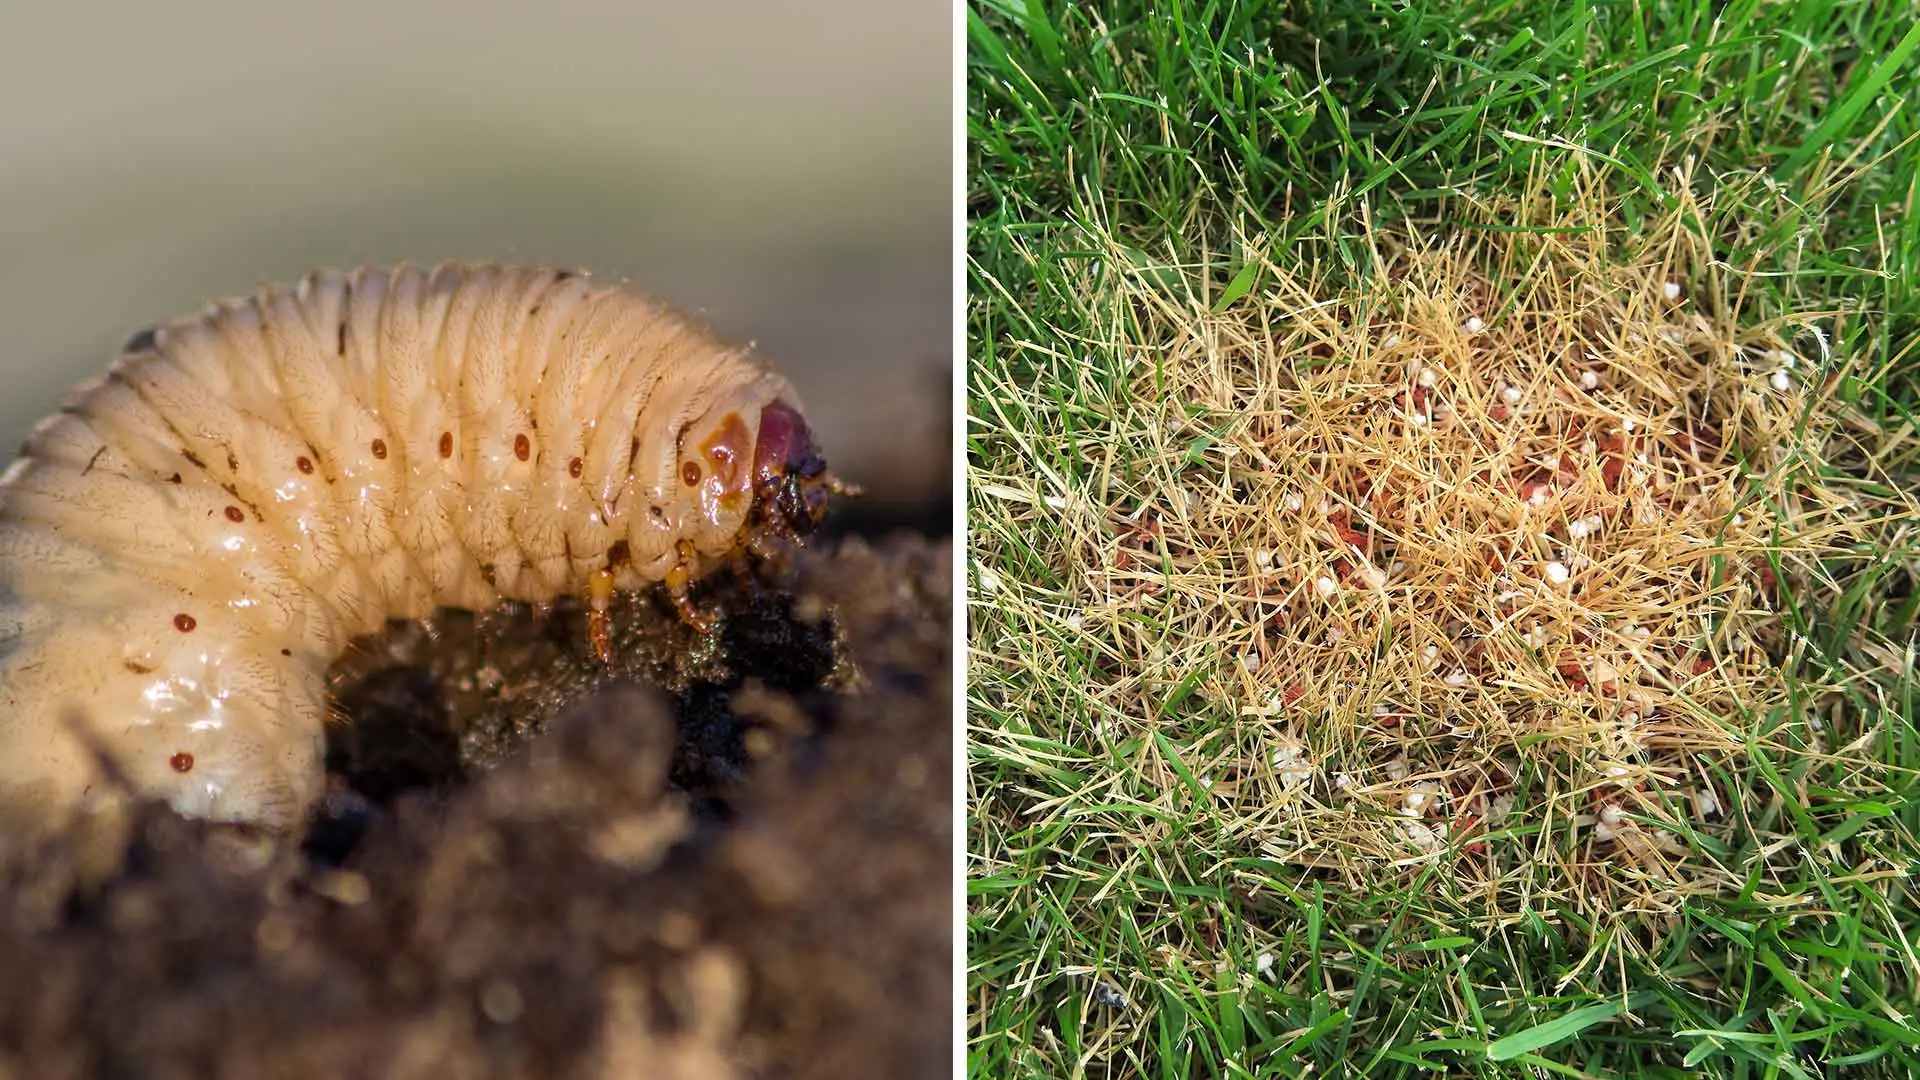 Grubs and brown patch are two afflictions that are common for Sunnydale Lawn Care to address.